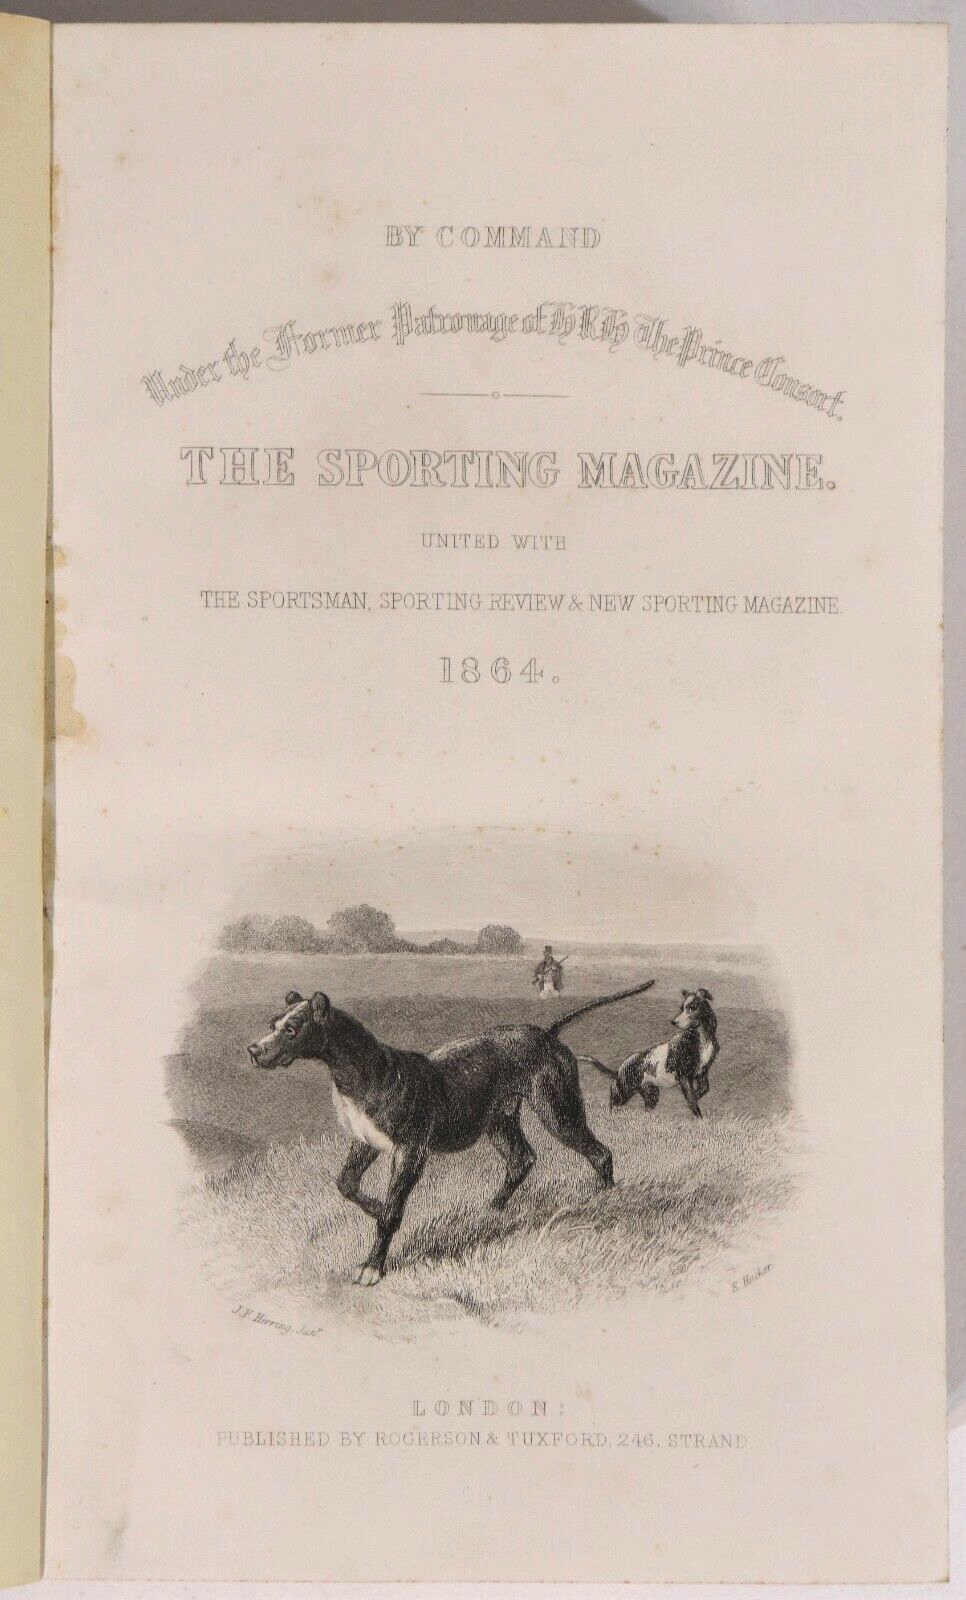 The Sporting Magazine & Sporting Review - 1864 - Antiquarian Sport History Book